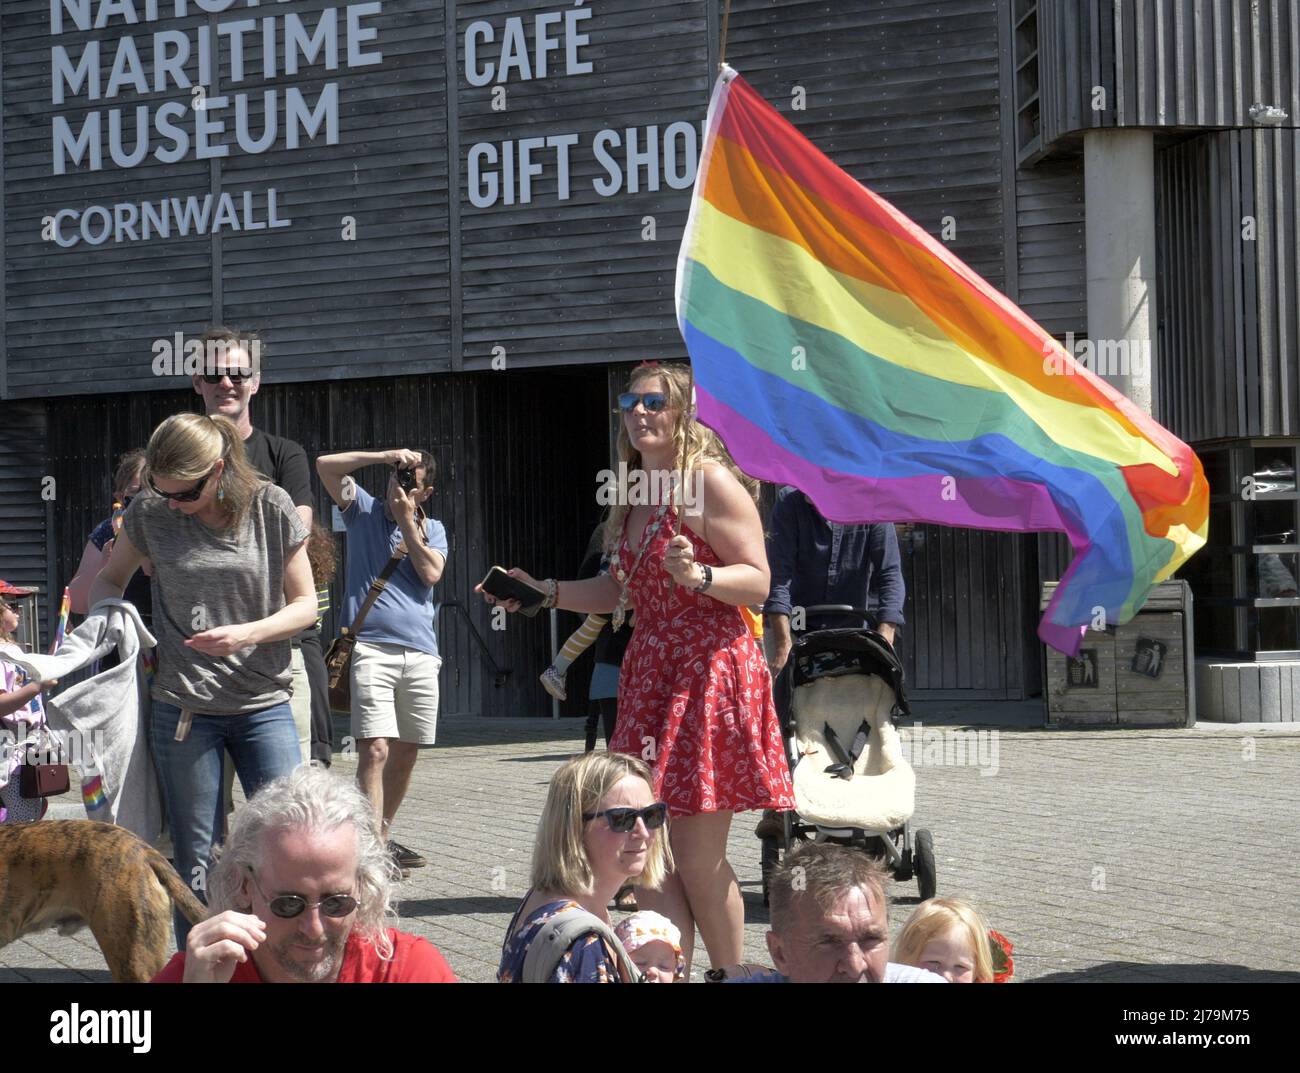 Falmouth Cornwall, UK 07th May 2022. A hero deputy town mayor replete with the chain of office and clutching her Rainbow pride flag is seen running towards a fire which has broken out in steak restaurant located in the Event square of Falmouth town. The Big Gay pride entertainment venue had to be evacuated for the safety of the crowds attending. Councillor Kirsty Edwards is a keen supporter of minority rights.  Falmouth Cornwall   Robert Taylor Alamy Live News Stock Photo